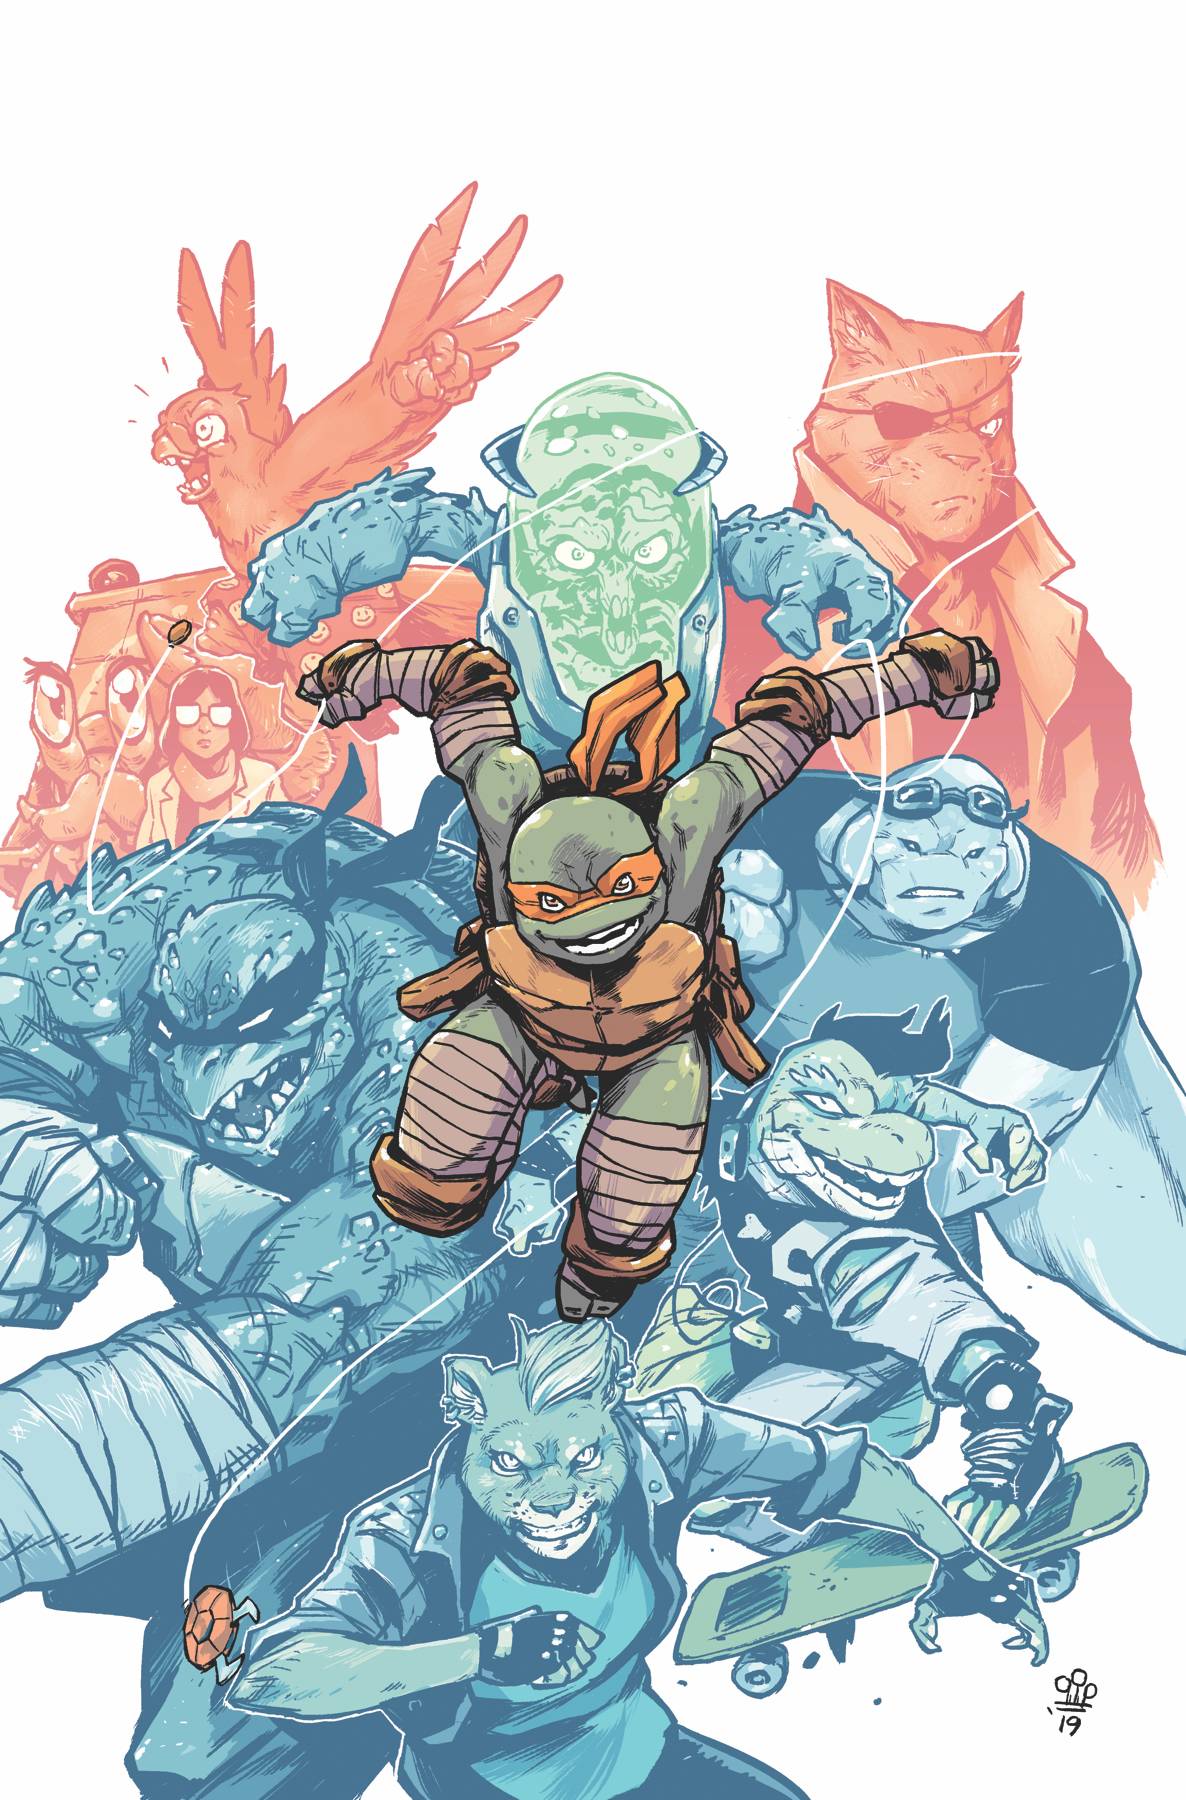 TMNT ONGOING #98 DIALYNAS 1:10 VARIANT 09/25/19 FOC 09/02/19